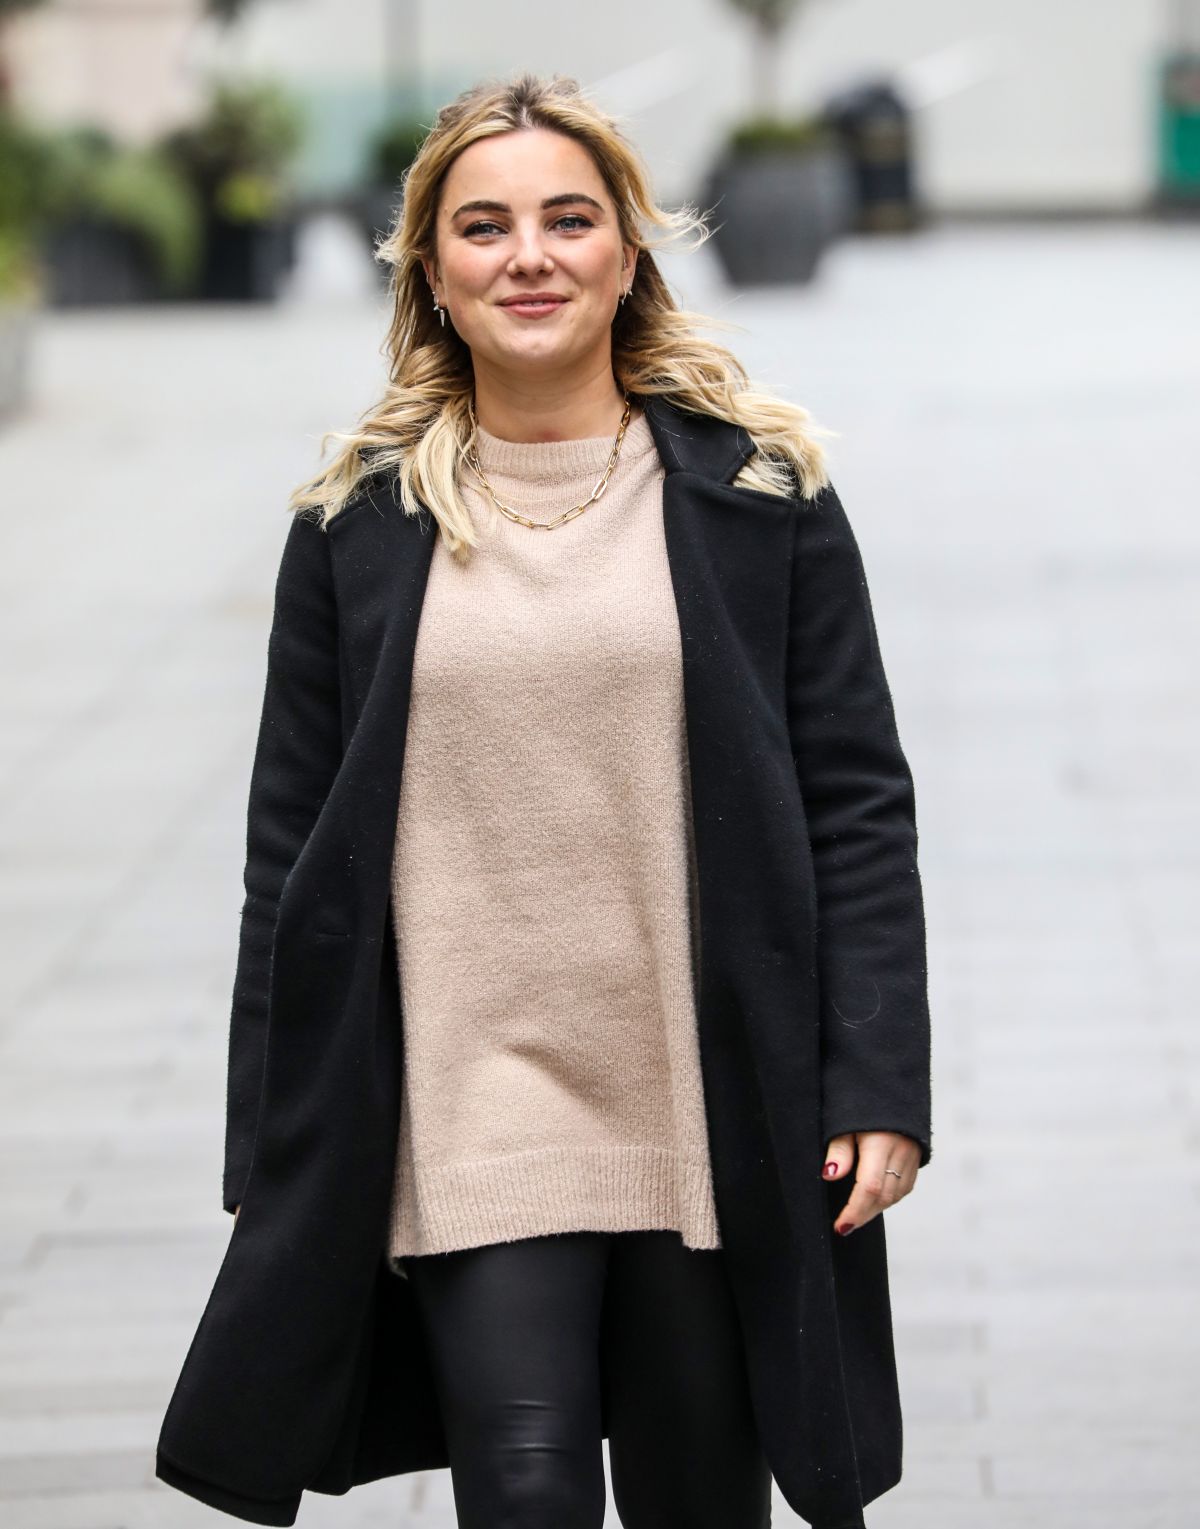 Sian Welby seen in Black Long Coat with Tights Leaves Global Studios in London 11/27/2020